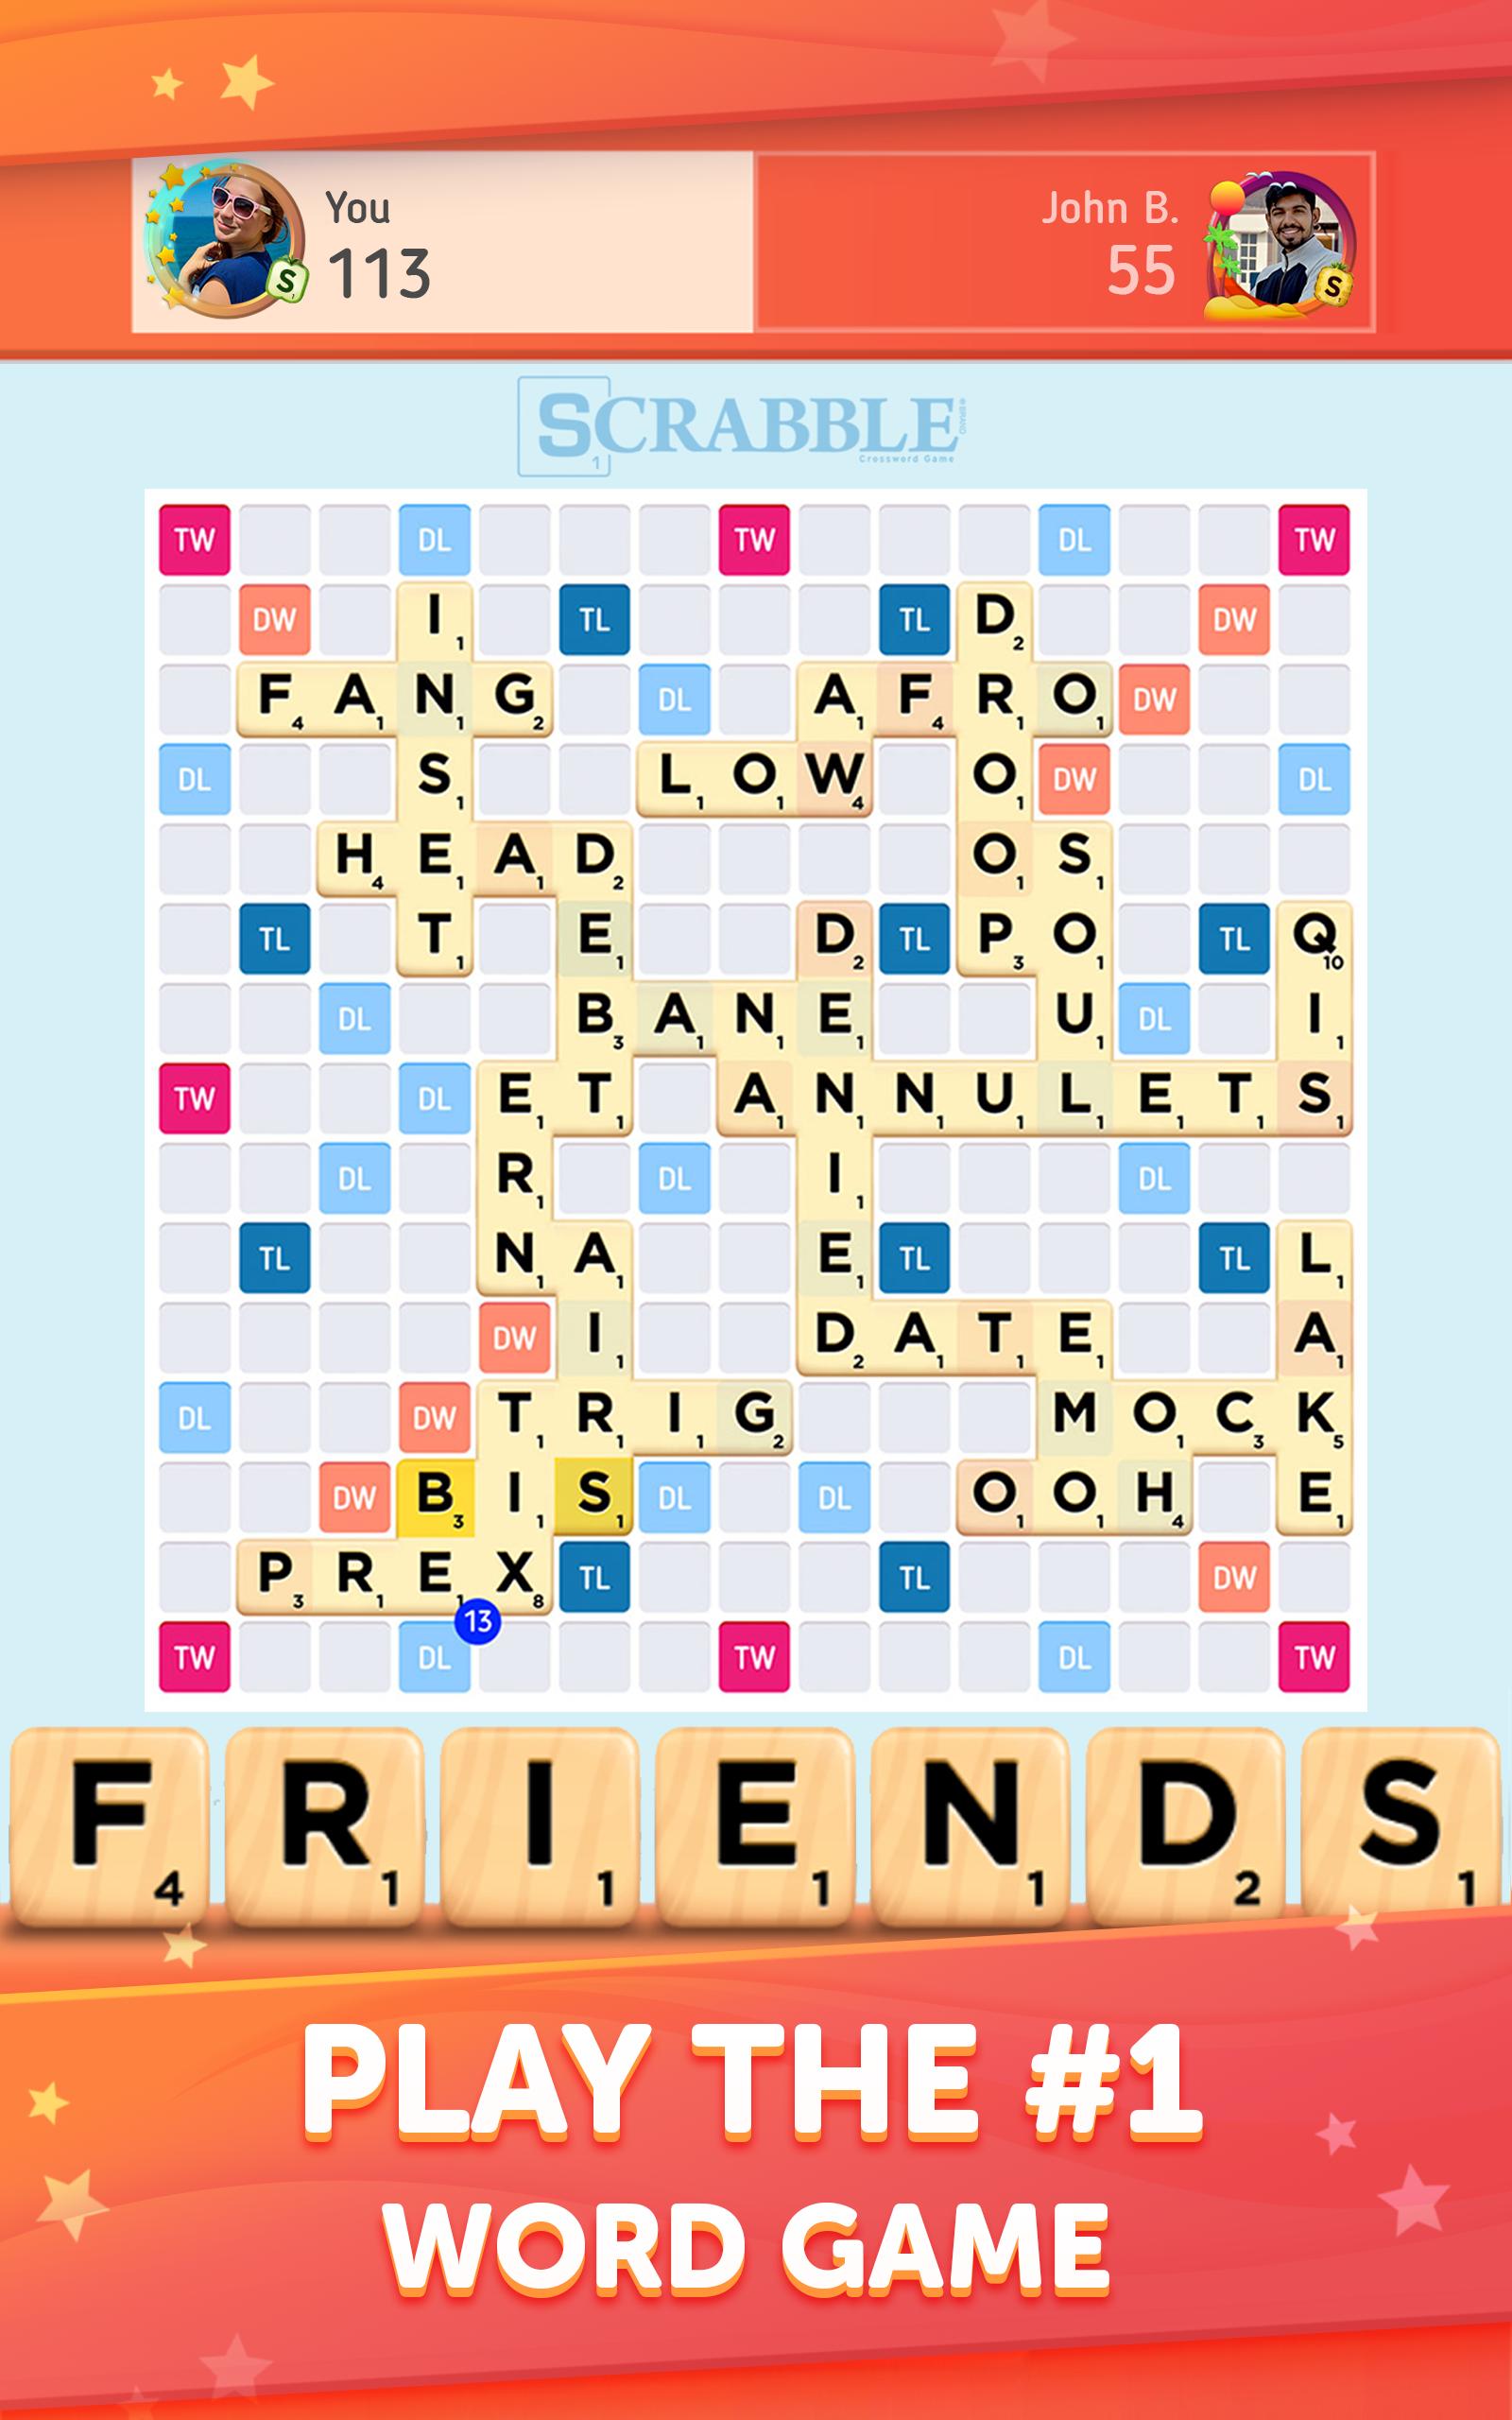 Scrabble® GO - New Word Game for Android - APK Download